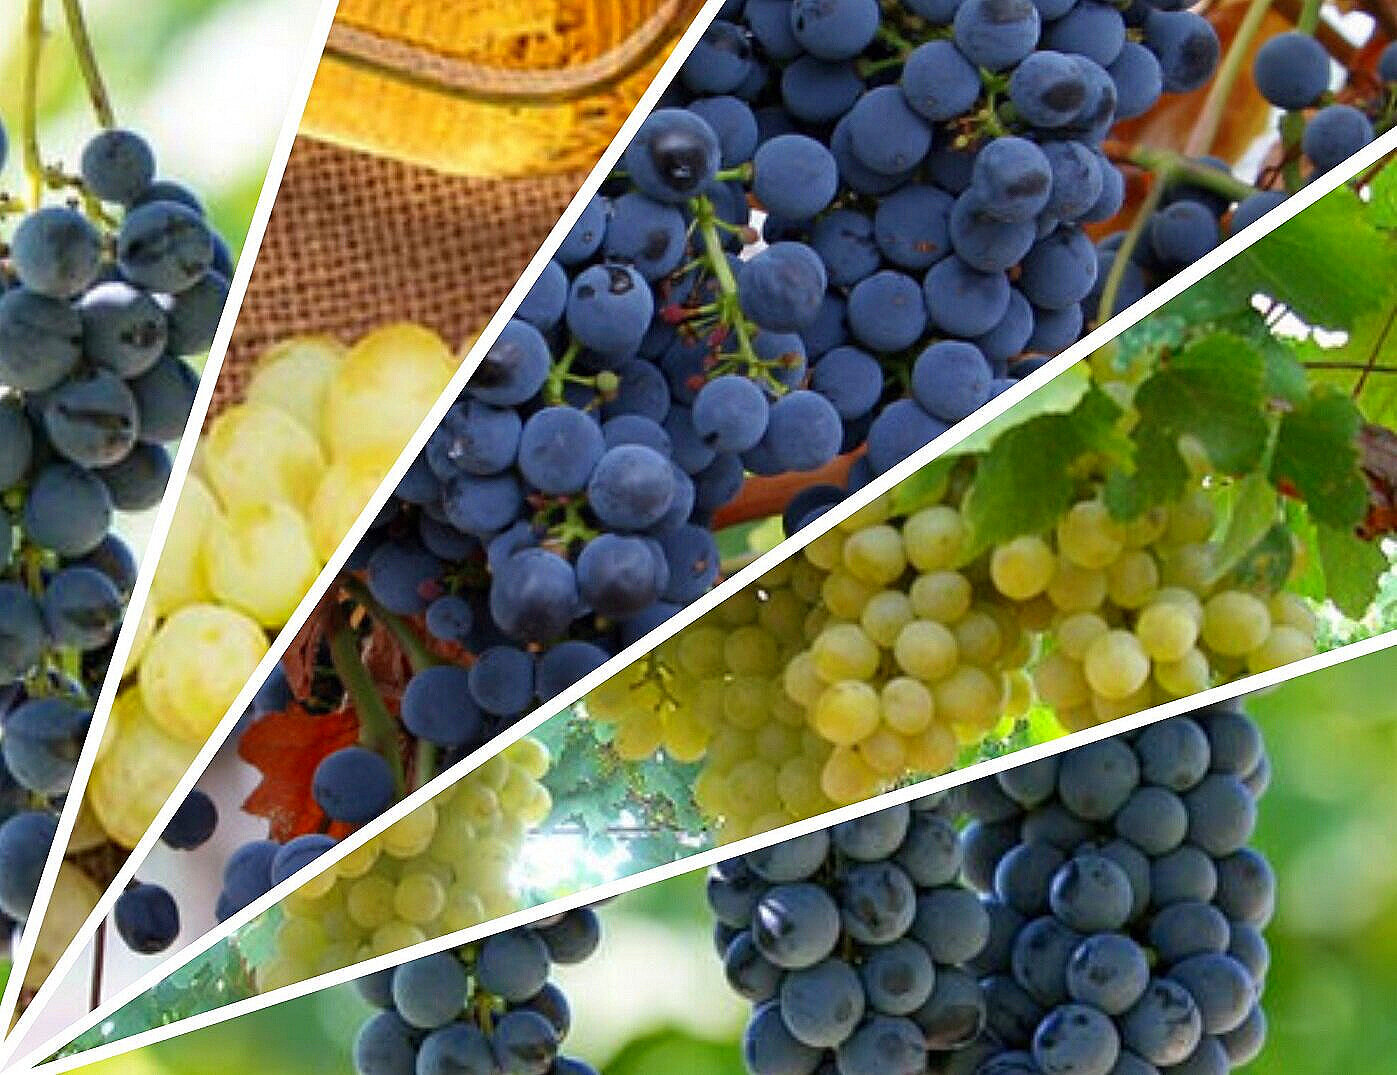 Carménère and other grapes saved from extinction to produce world-class wines